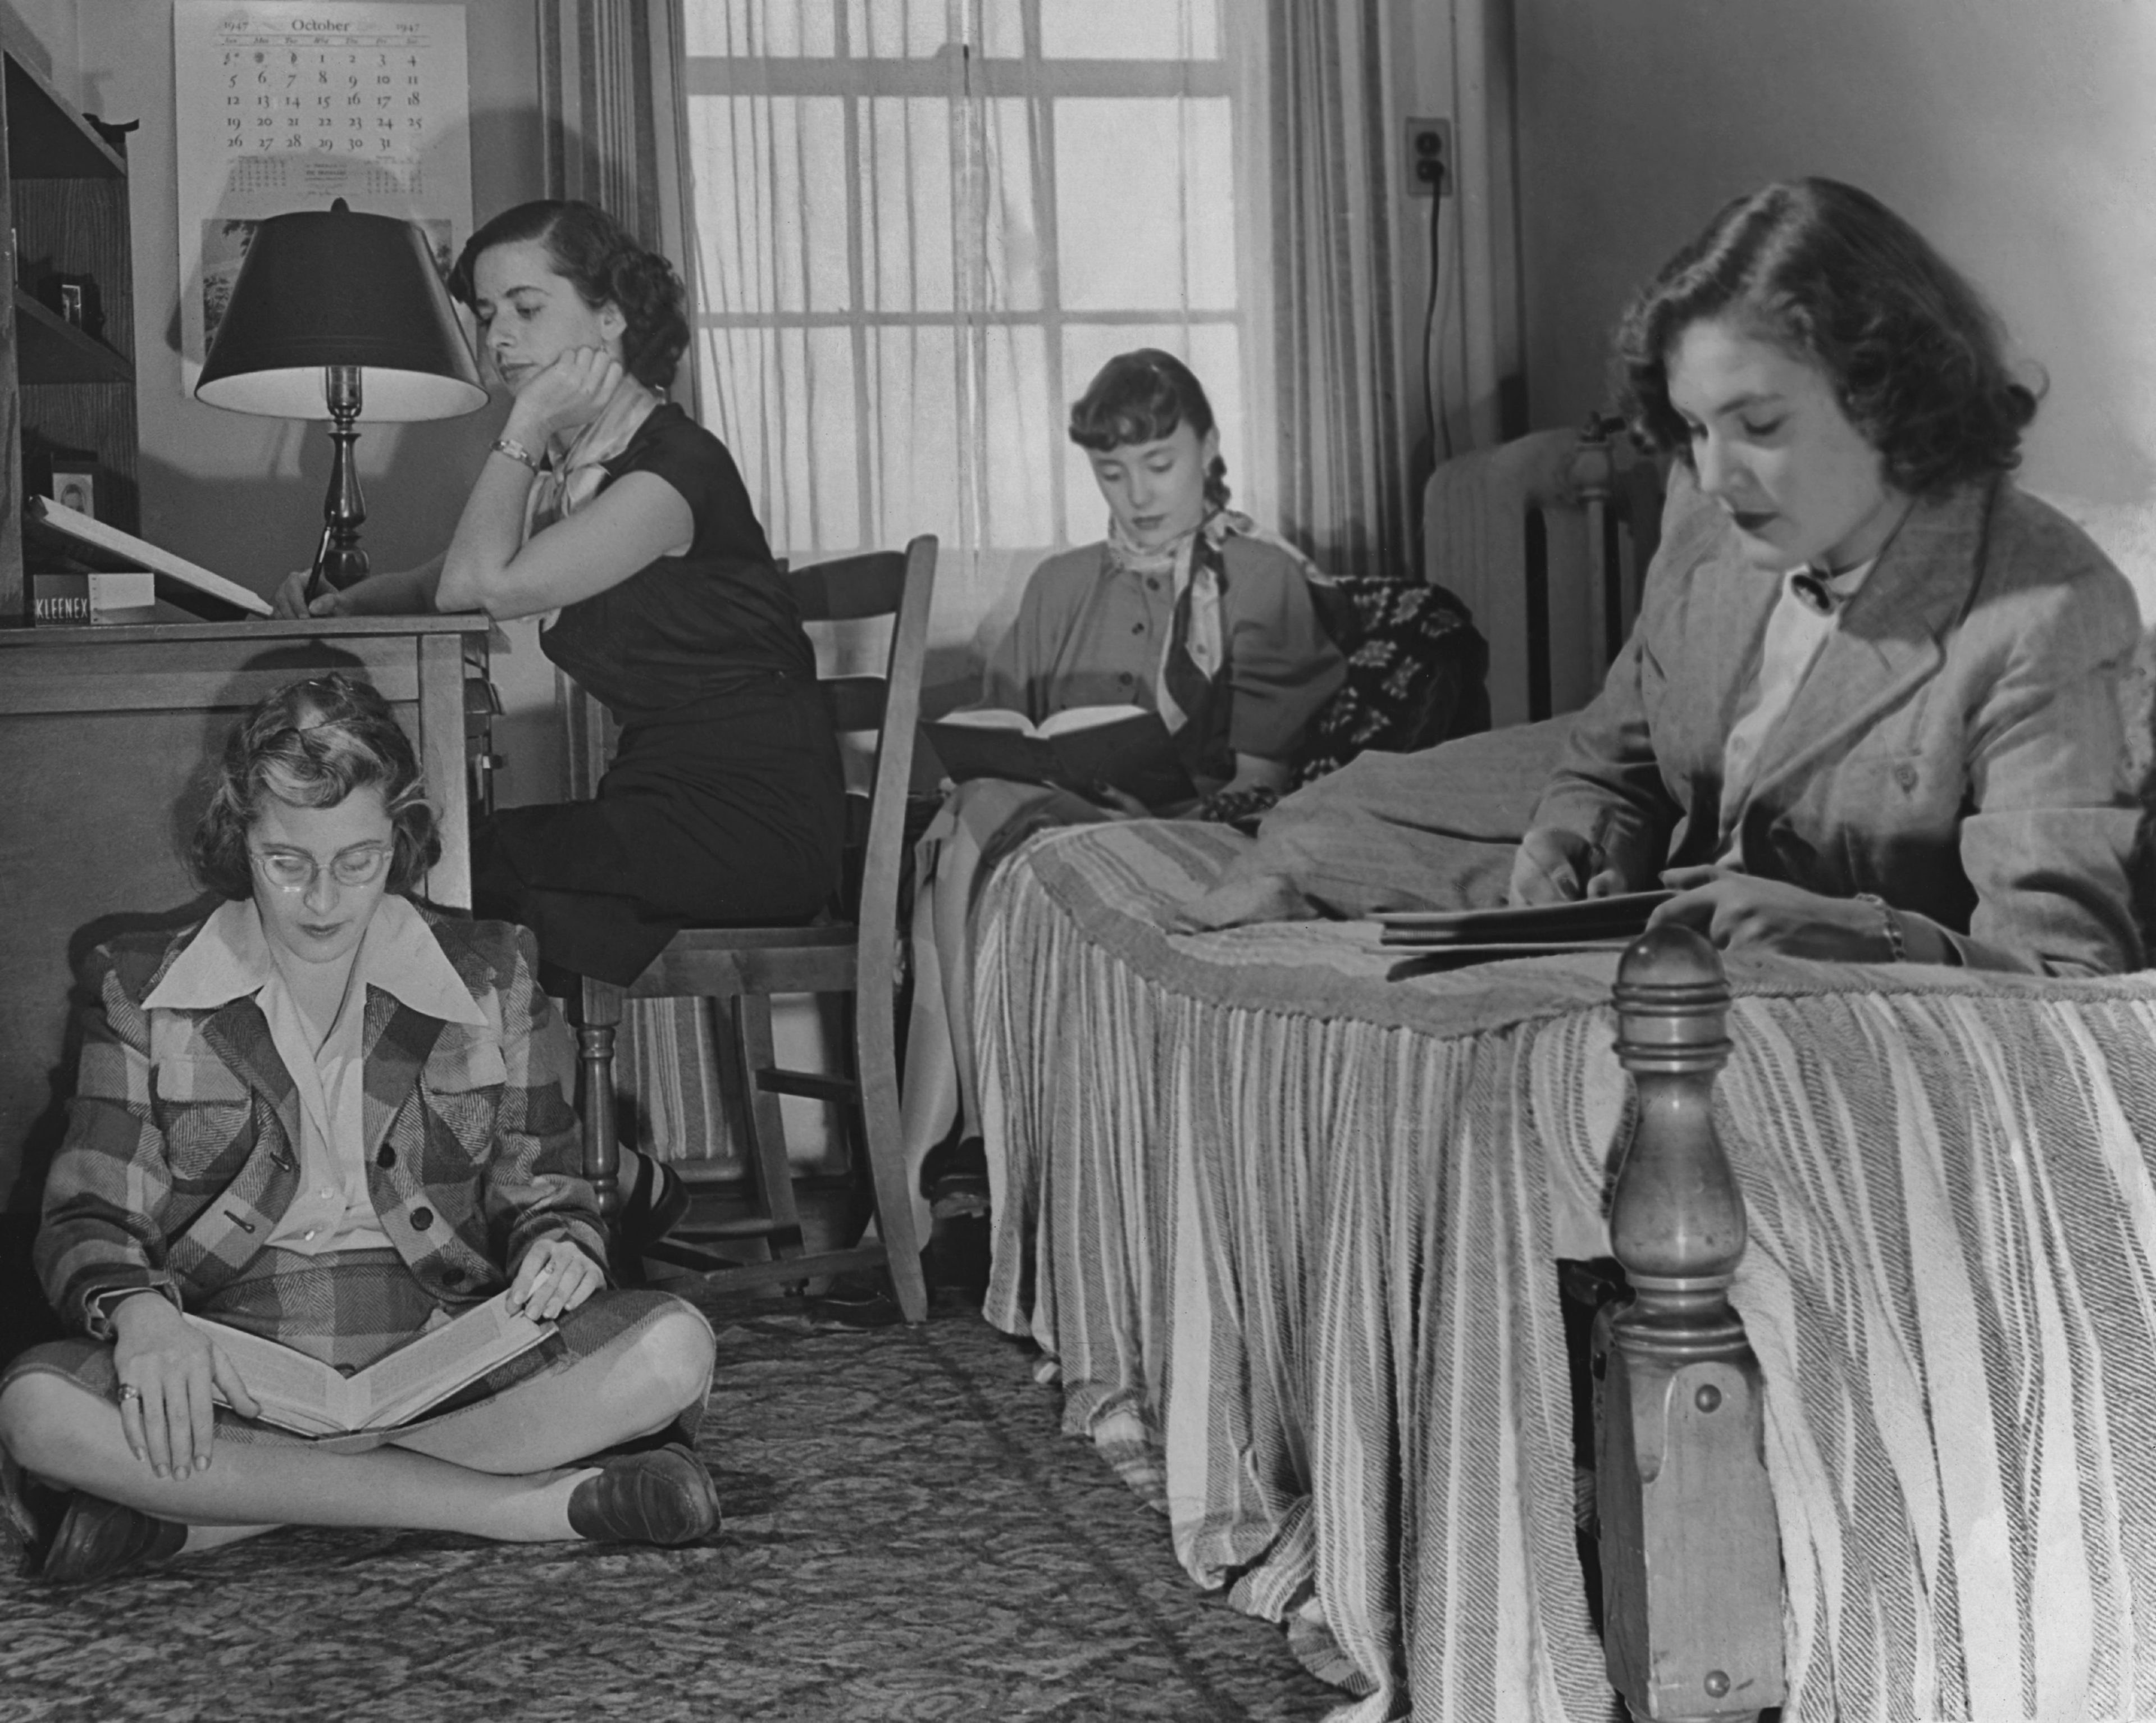 Four female students studying in a dorm room circa 1950's.